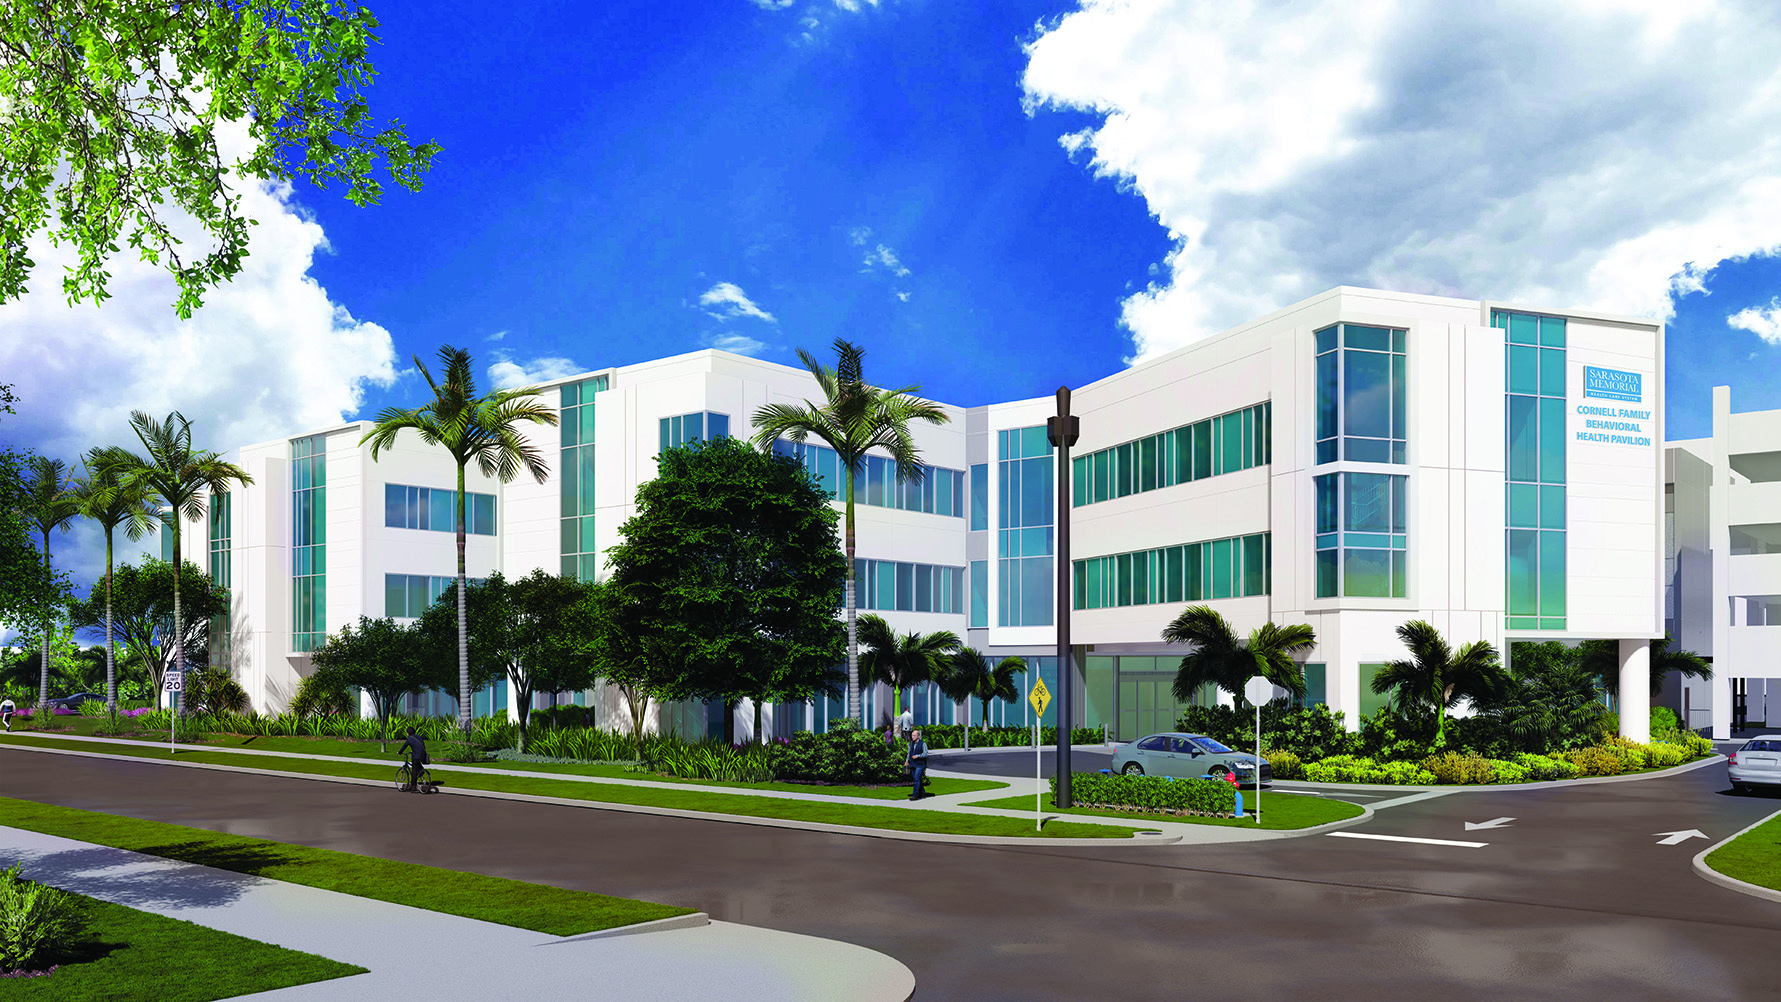 A model of the coming Cornell Family Behavioral Health Pavilion's exterior. (Rendering courtesy of Sarasota Memorial Hospital)